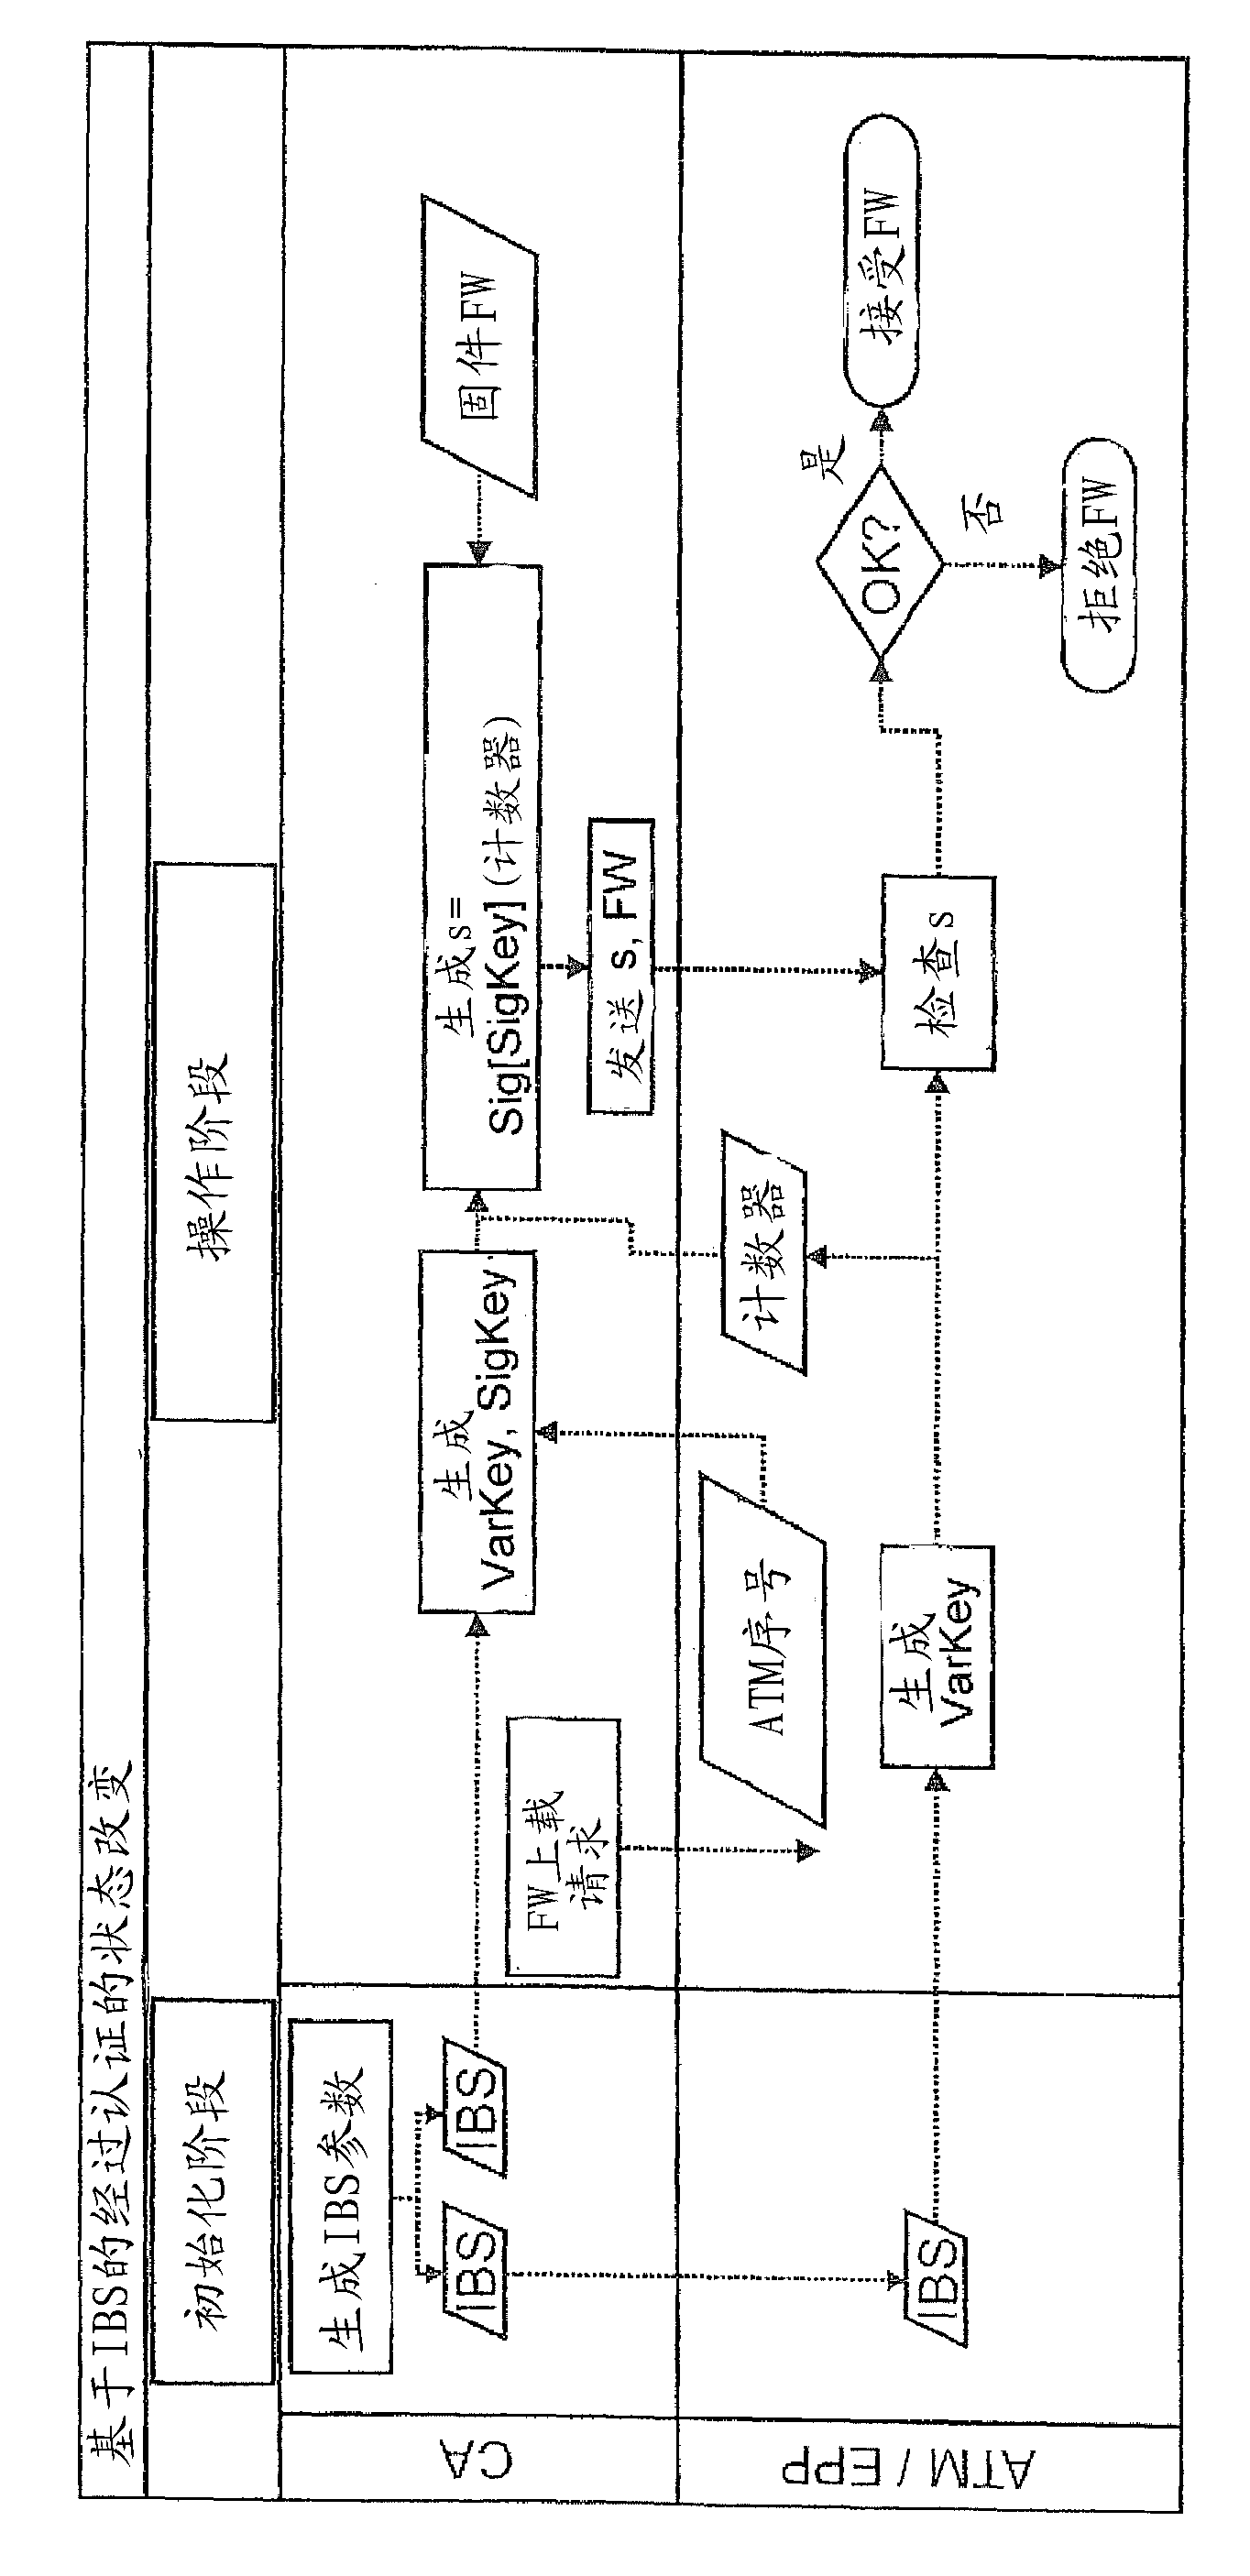 Method and device for authenticating components within an automatic teller machine